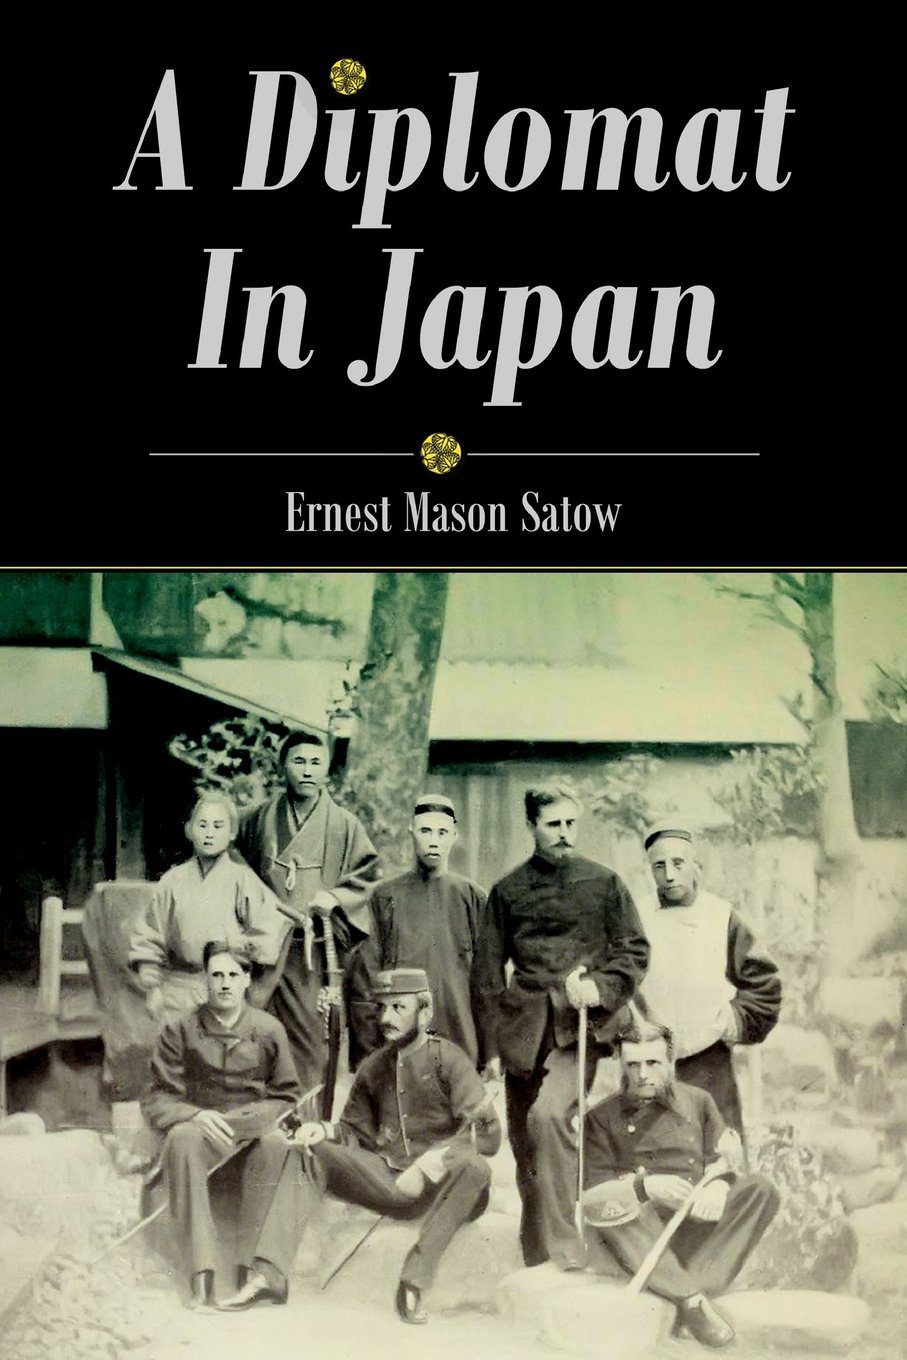 a black and white photo of a ski team, diplomat in japan, Ernest Mason Satow